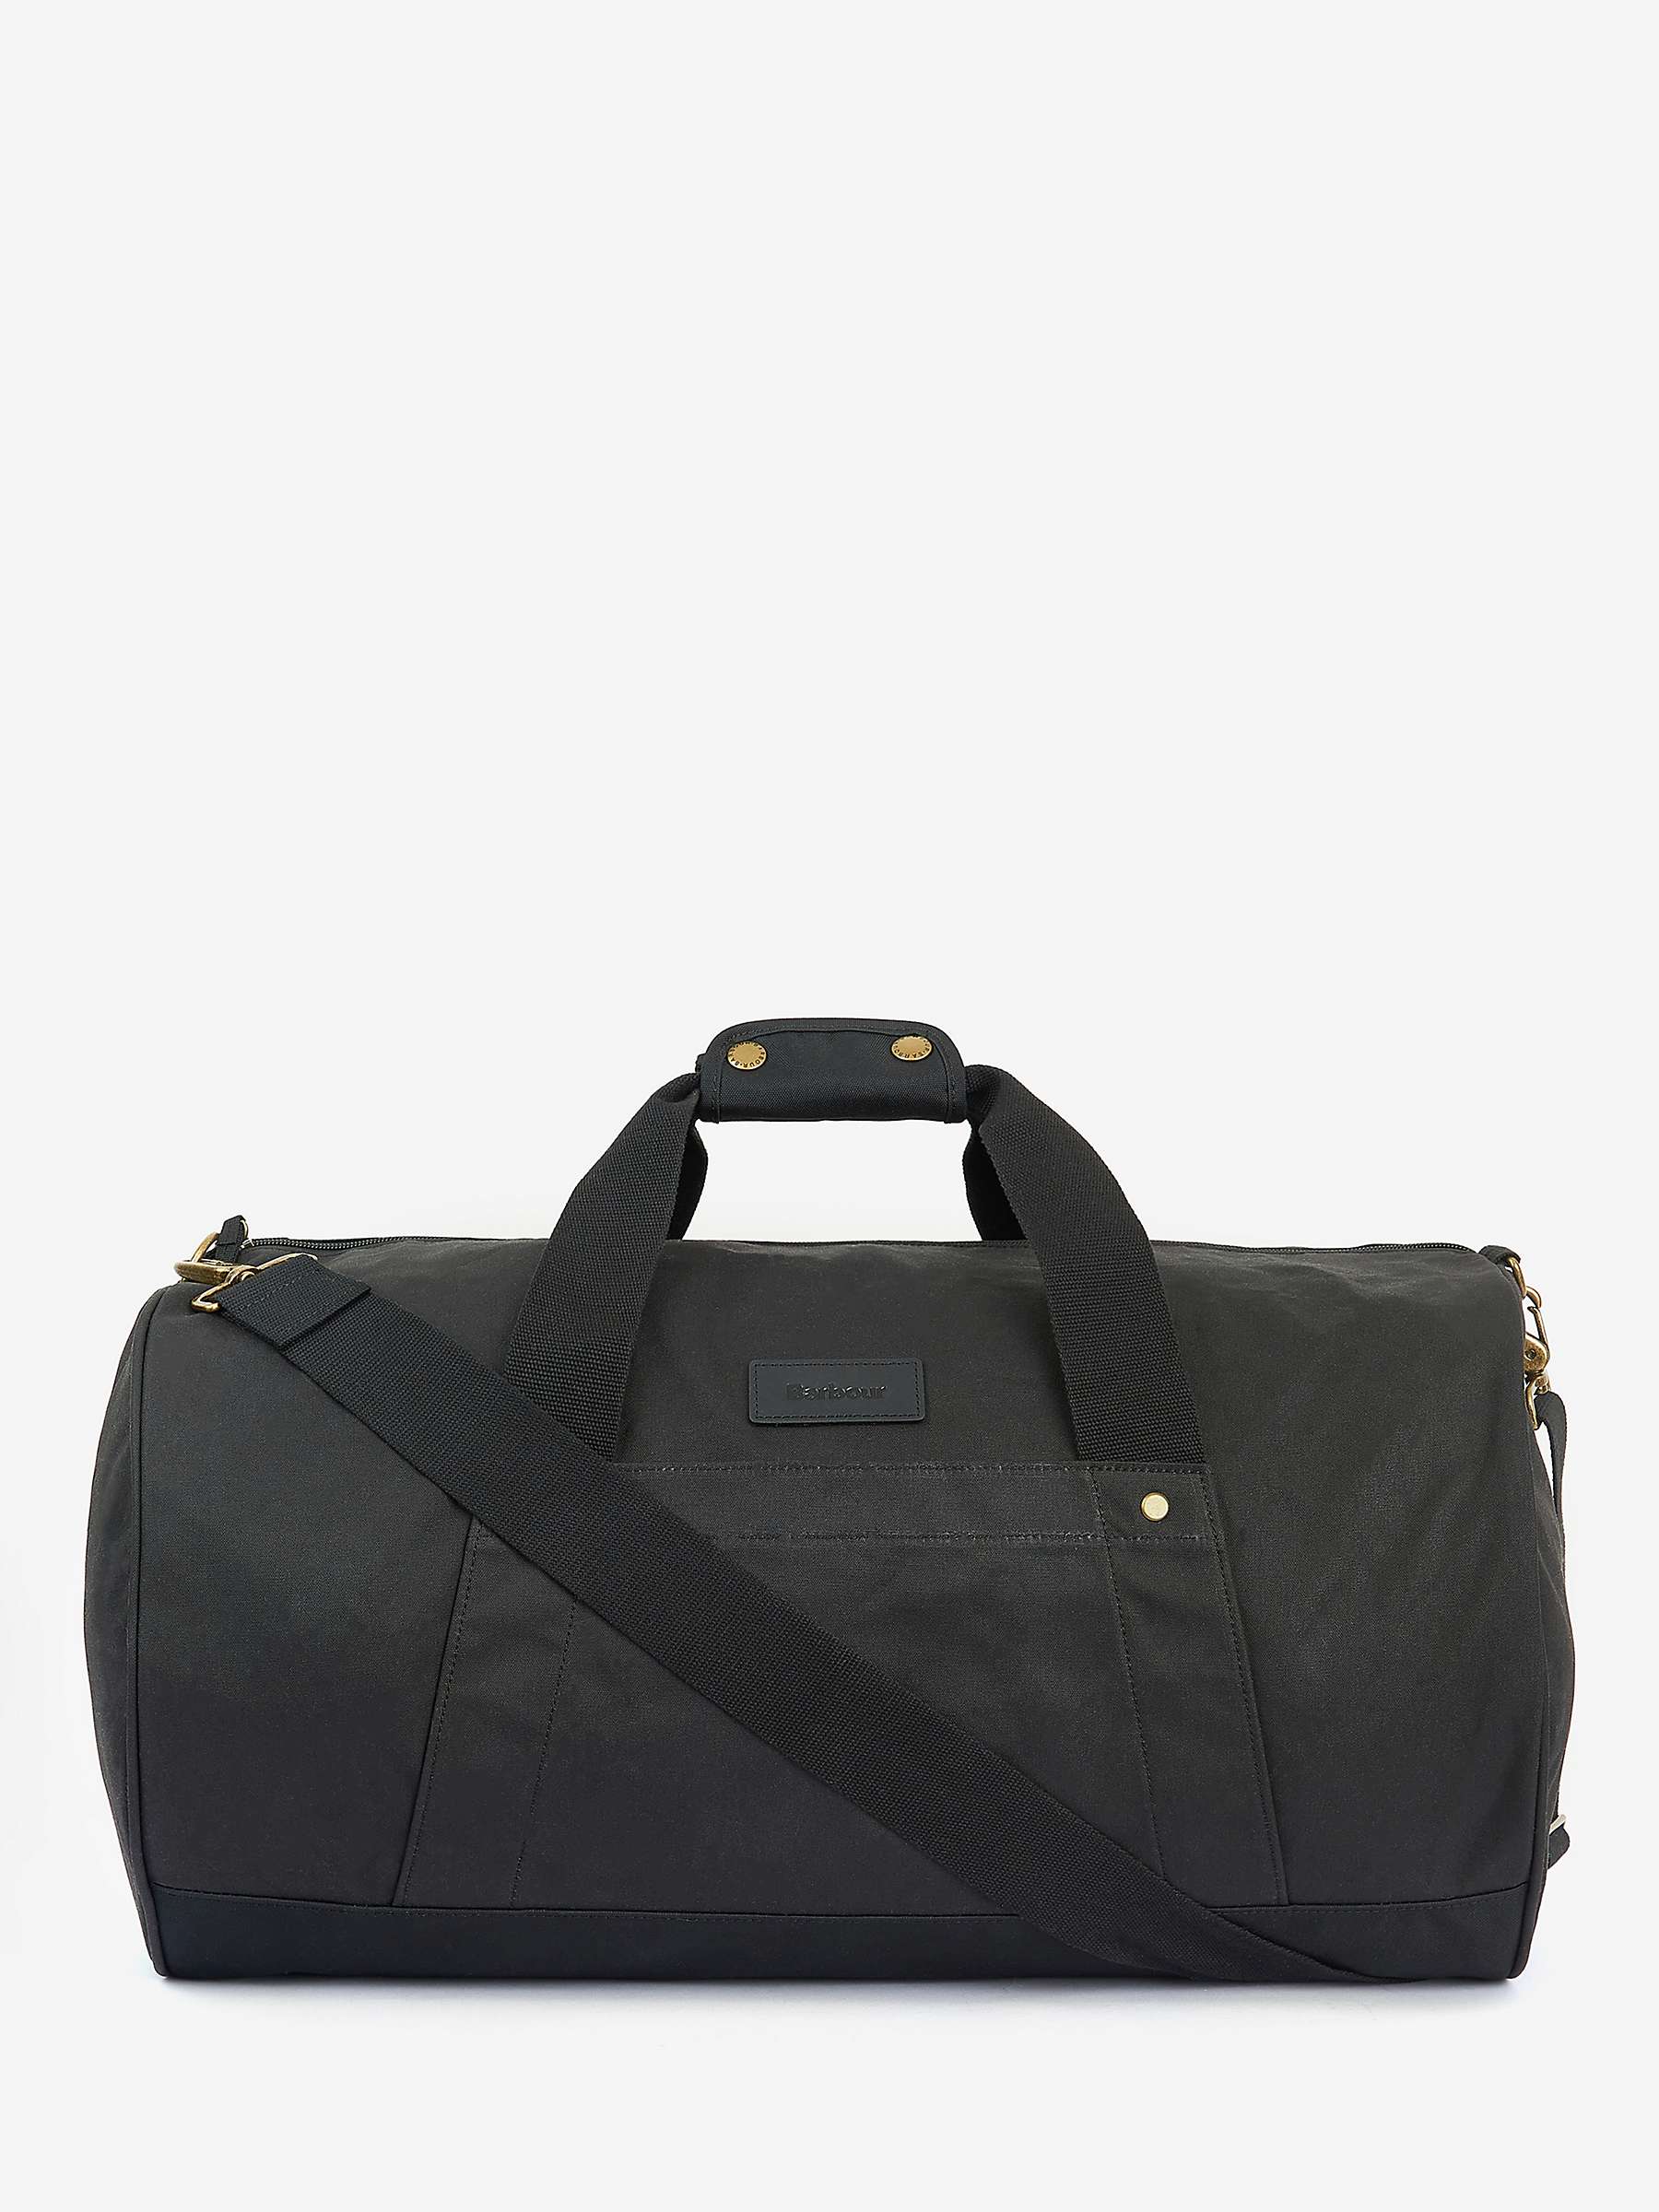 Buy Barbour Barrell Wax Cotton Holdall Online at johnlewis.com